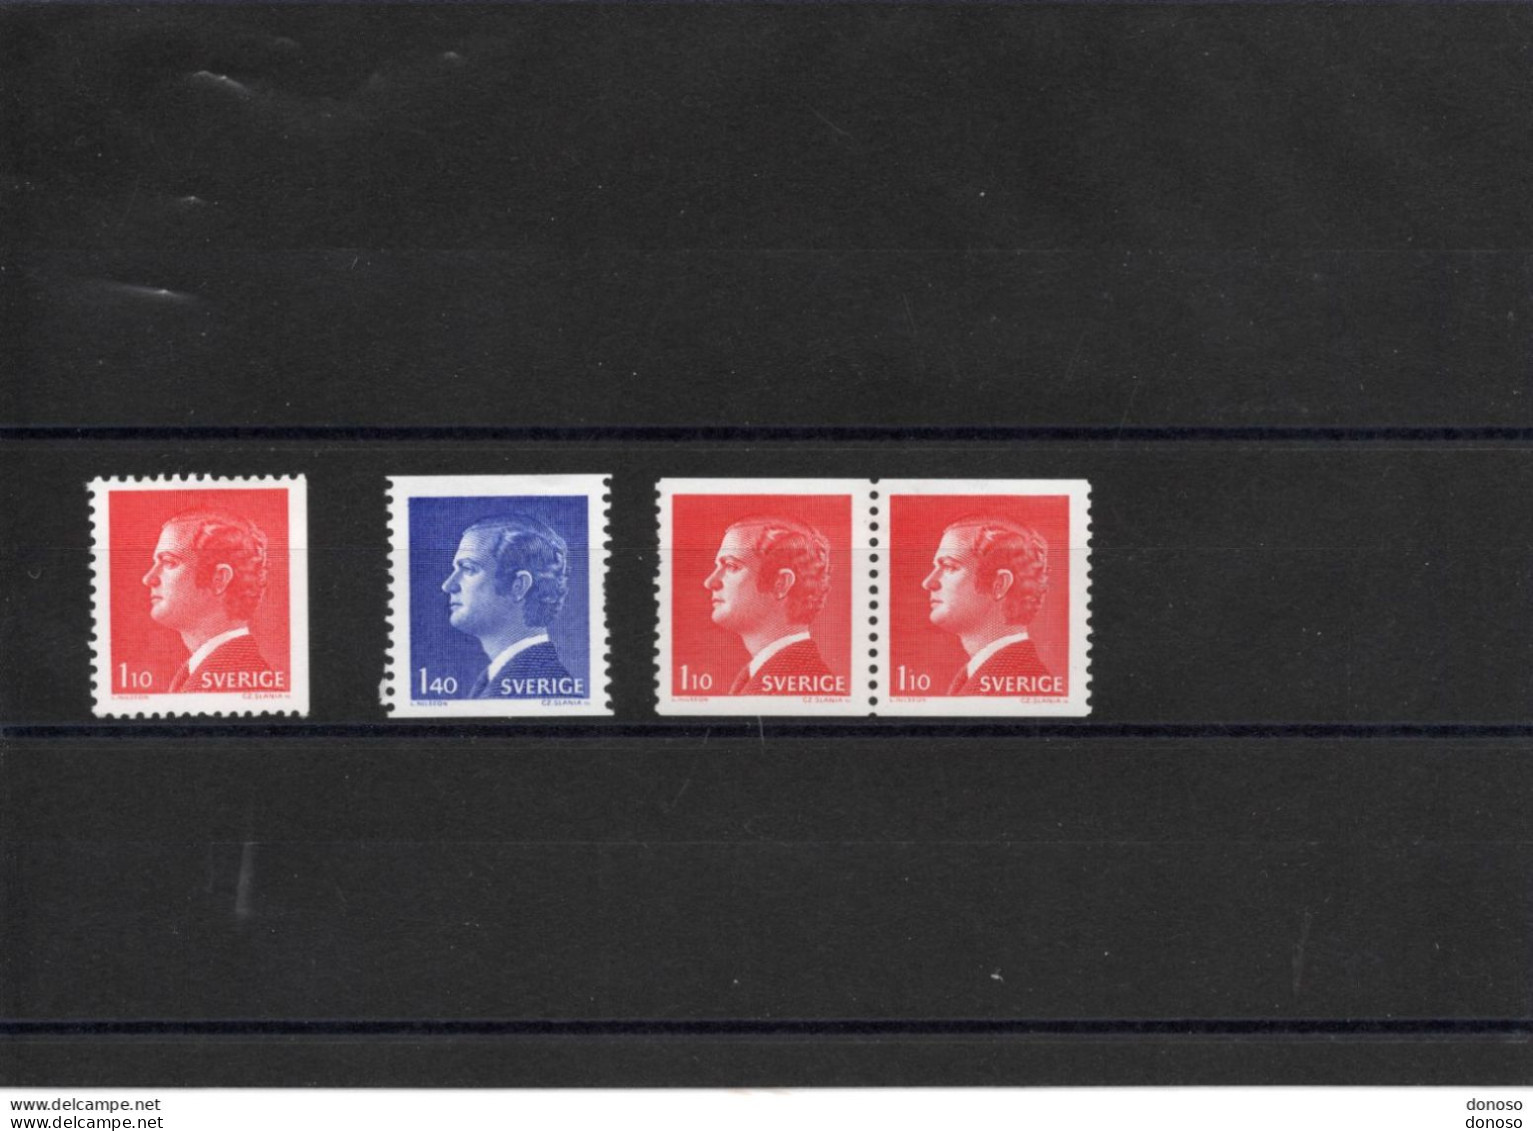 SUEDE 1977 CHARLES XVI Yvert 954-955 + 954a NEUF** MNH Cote 2,80 Euros - Unused Stamps